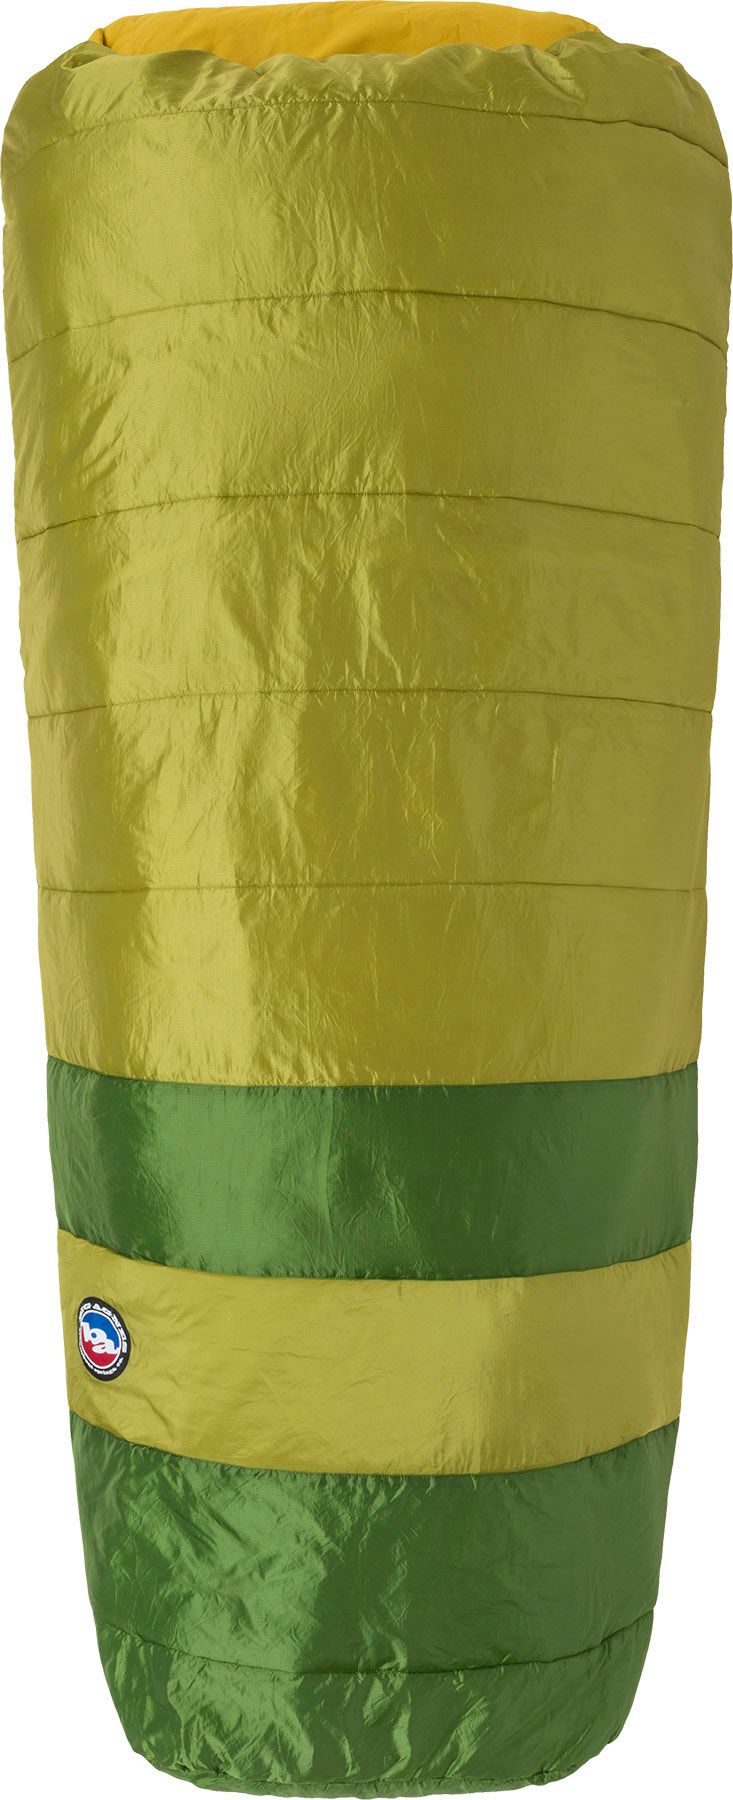 Photos - Suitcase / Backpack Cover Big Agnes Echo Park 40 Sleeping Bag, Men's, Long, Green/Olive 21TUMUCHPRK4 